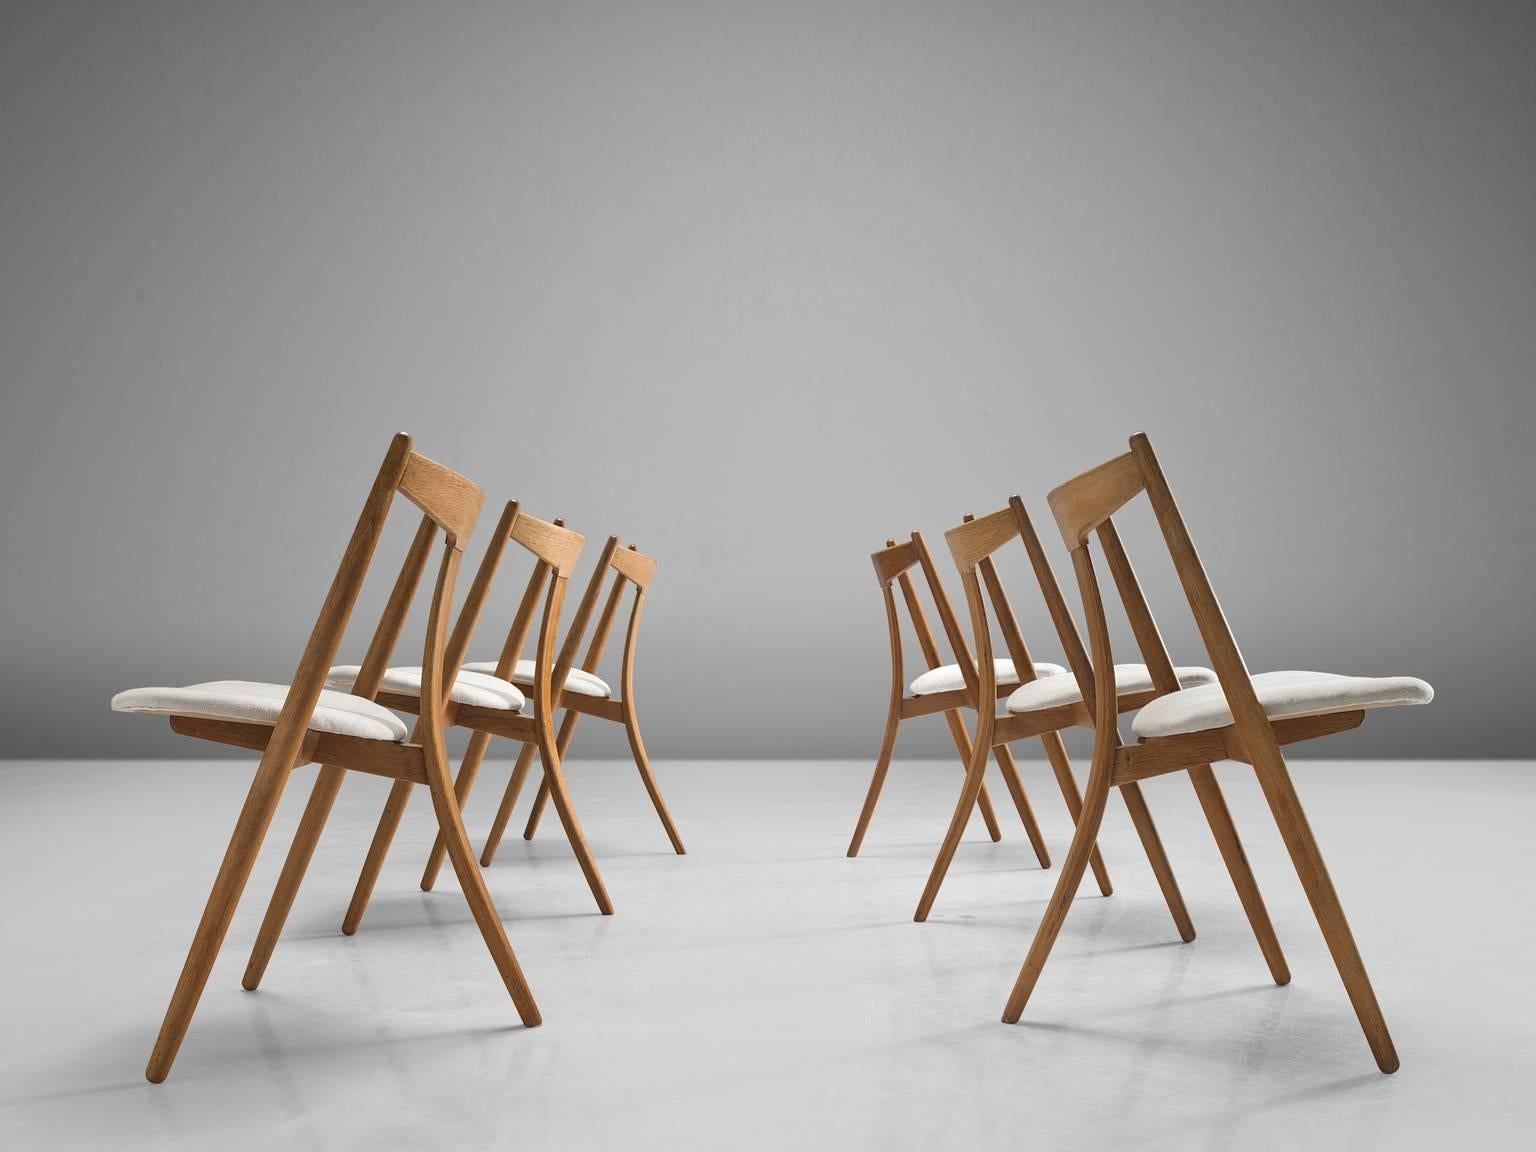 Dining chairs, teak and oak, Denmark, 1950s.

This set of six chairs is made by a cabinetmaker in Denmark. The chairs have a tripod frame made of oak and a backrest executed in teak. The chairs main characteristic is the bent single back leg. The